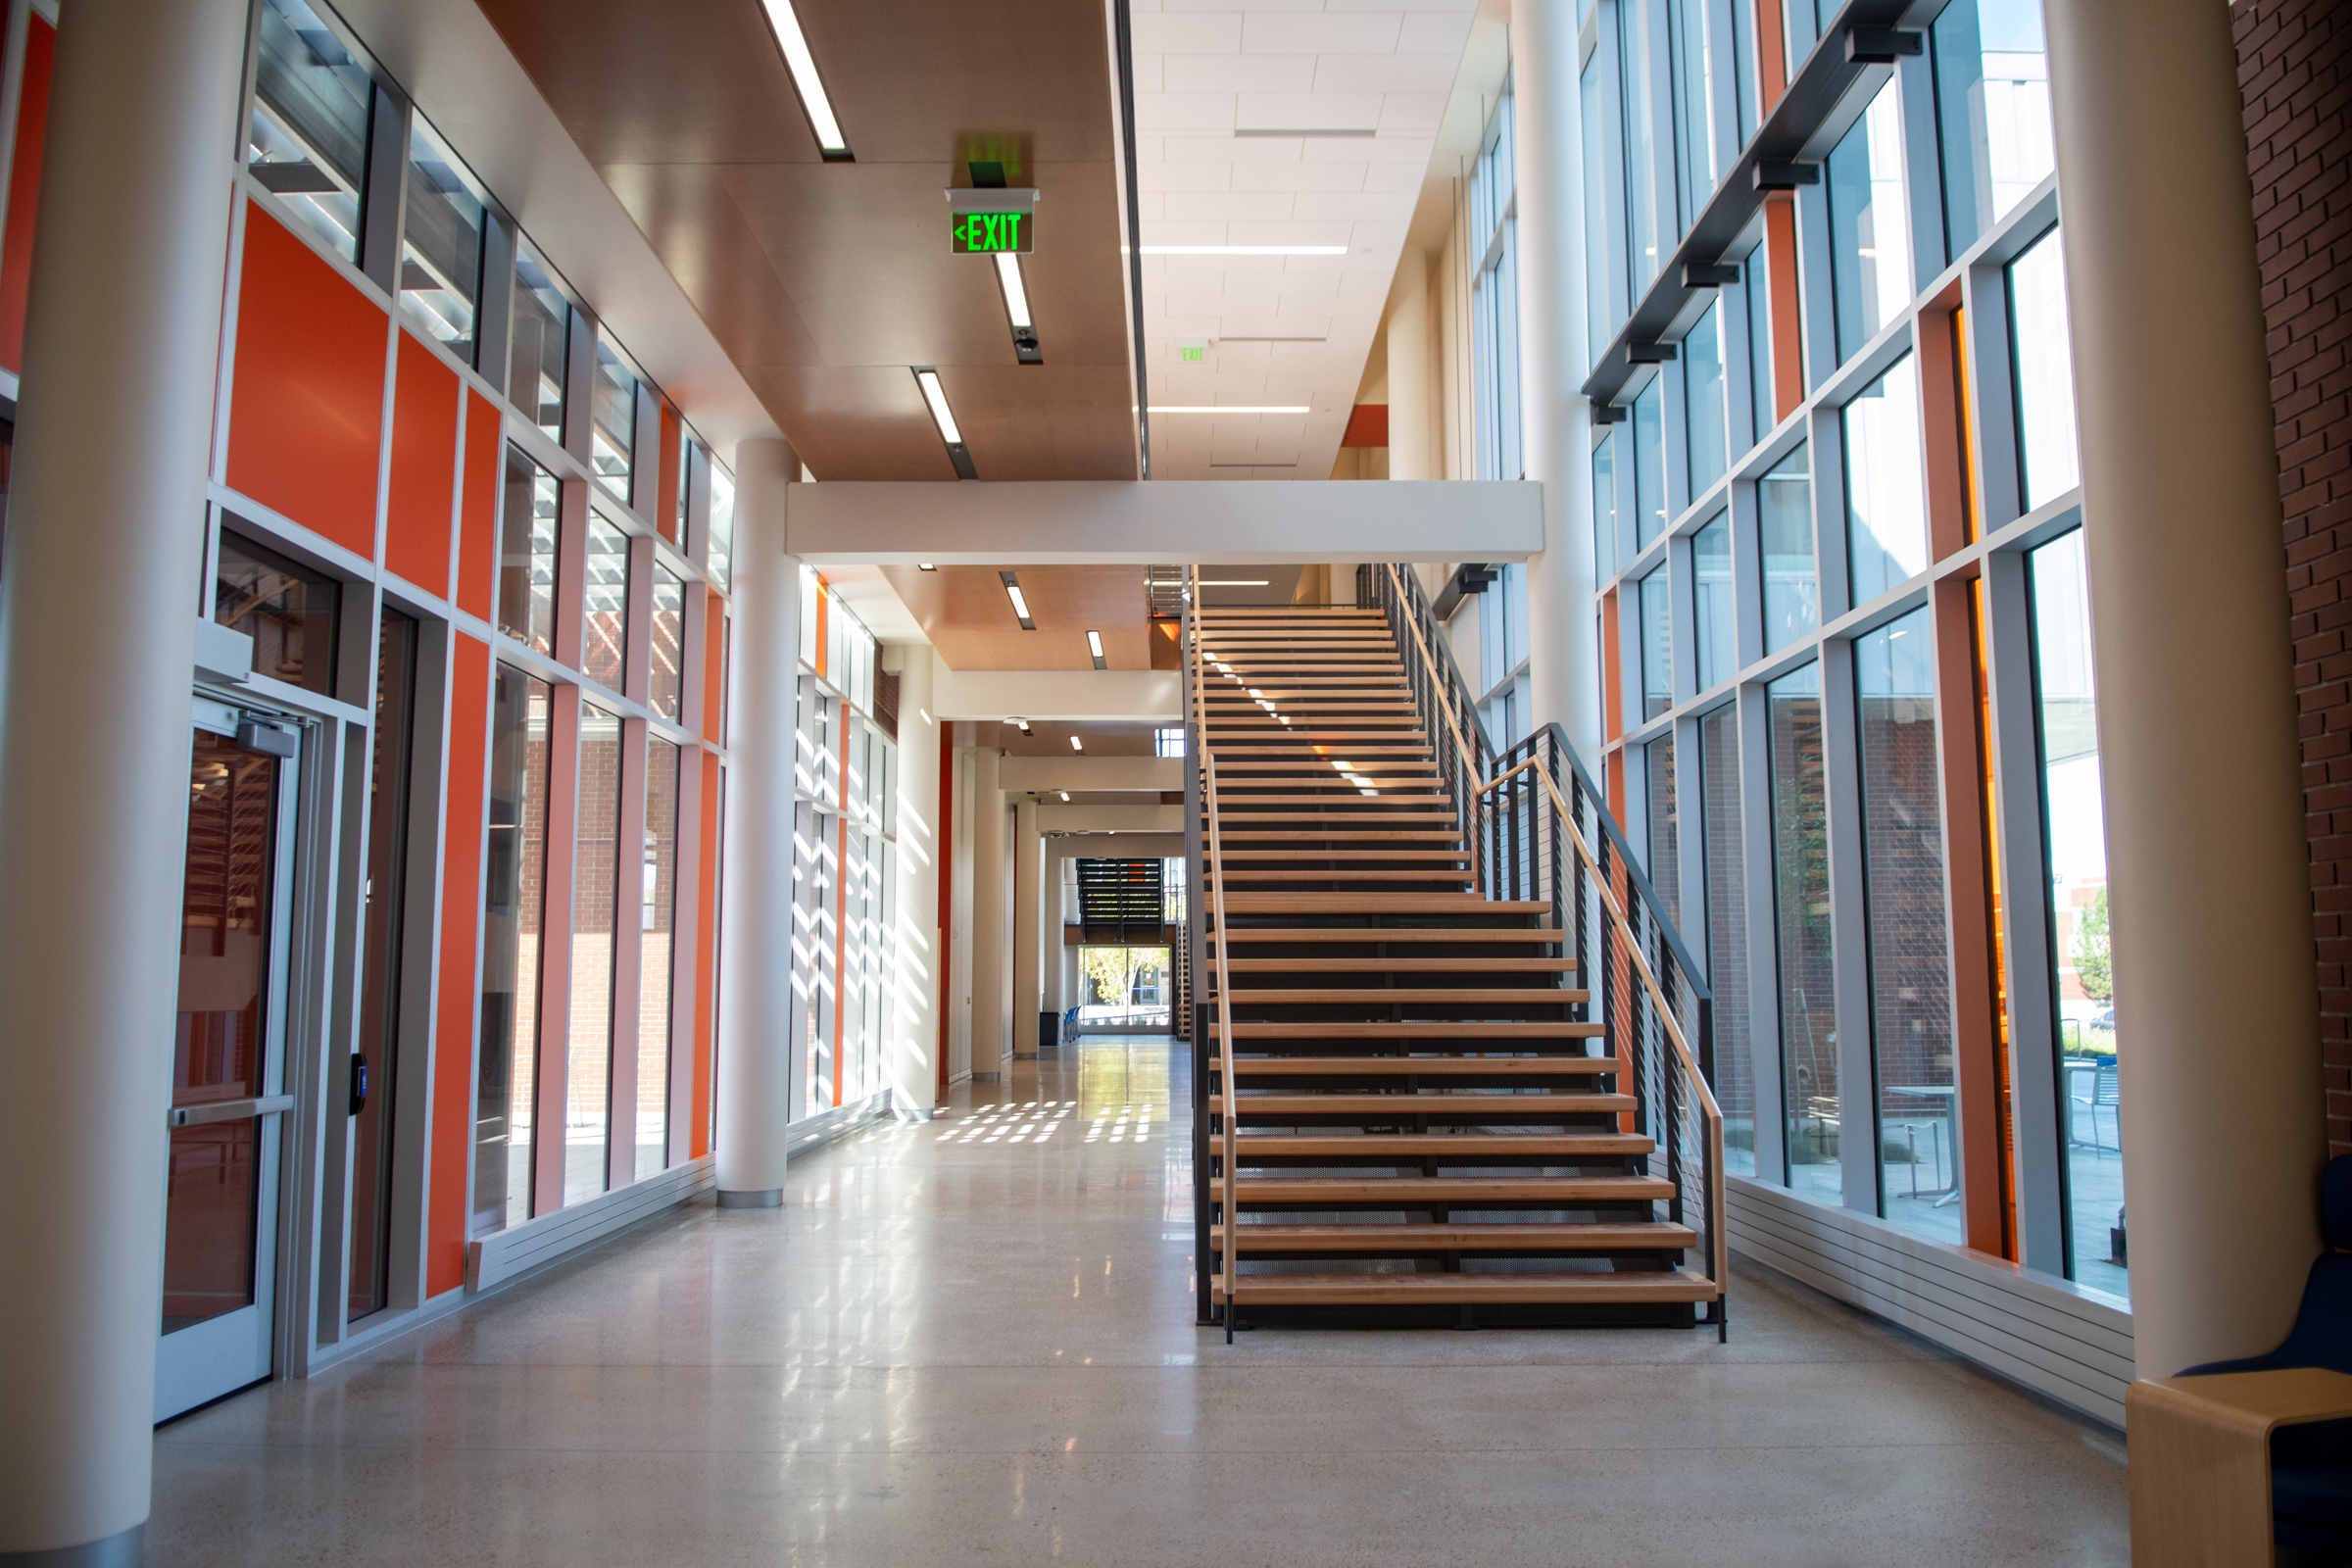 Interior of the Micron Center for Materials Research with main staircase